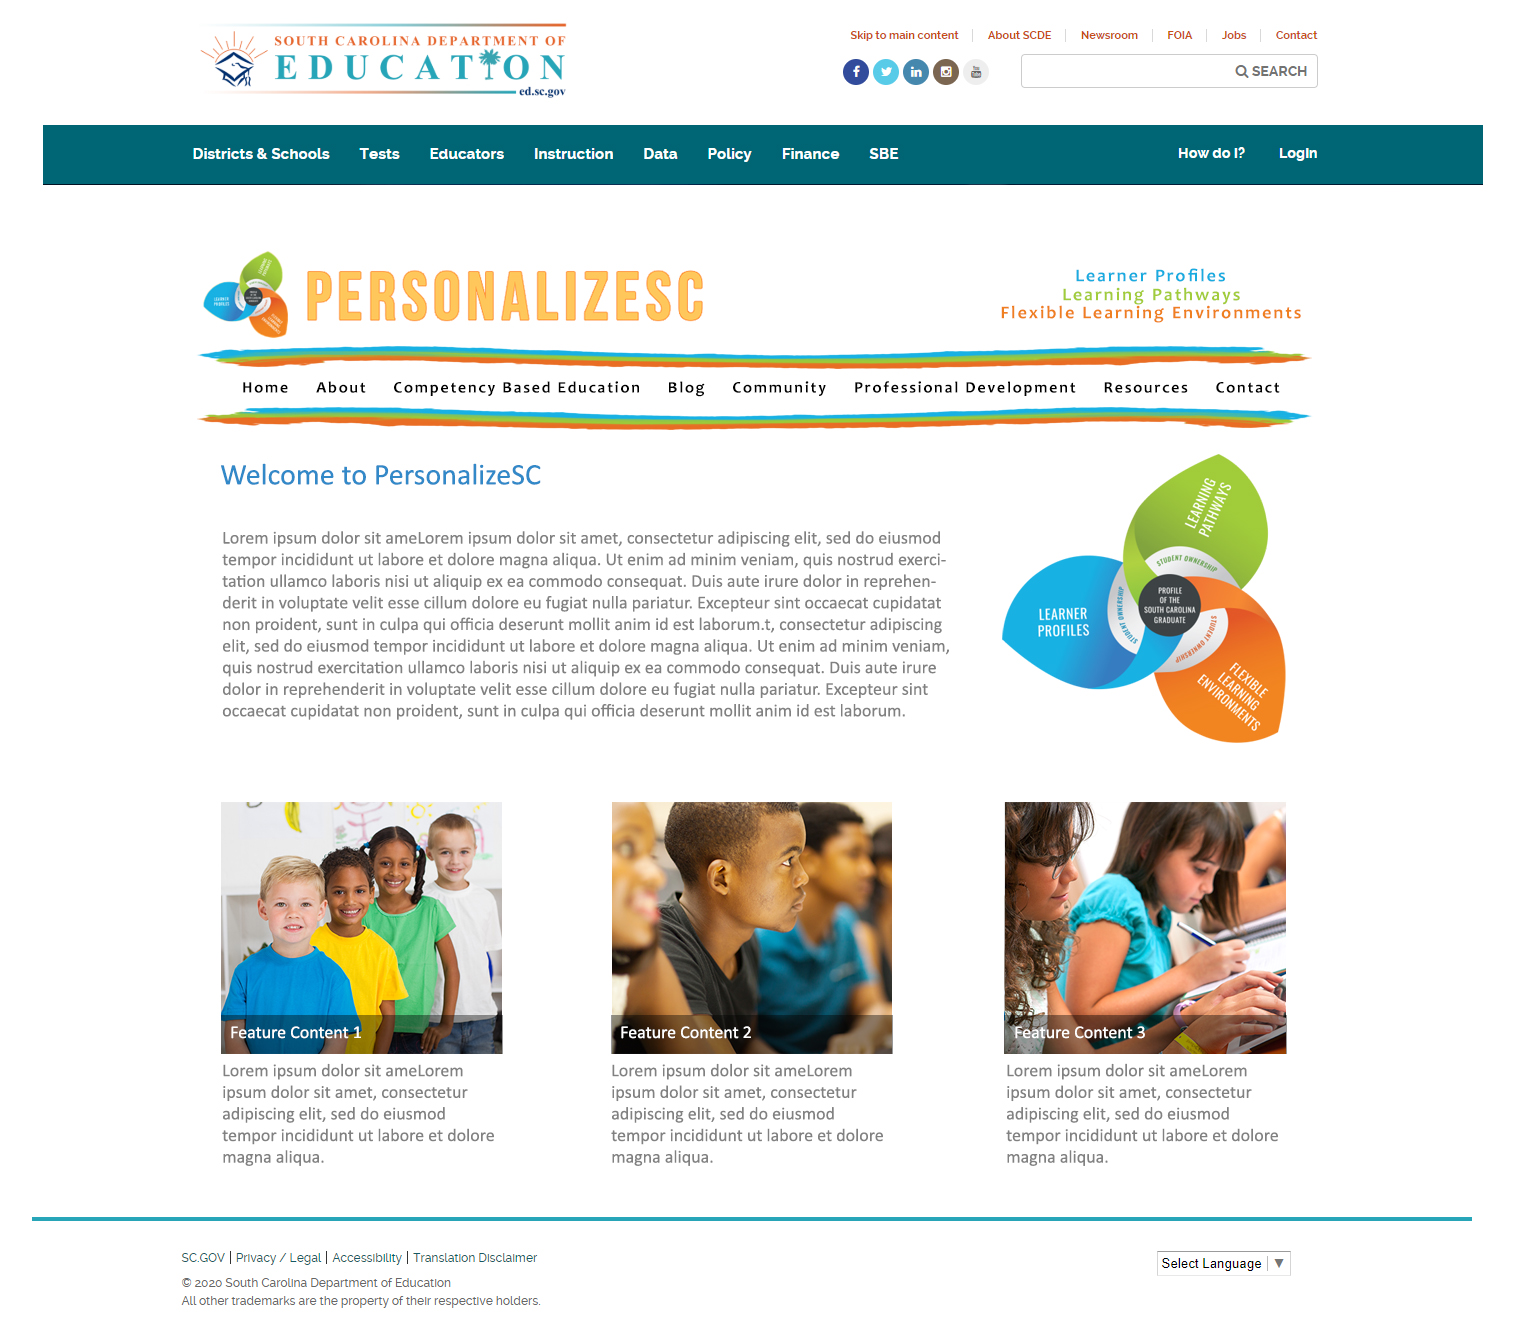 Wireframe image for personalizesc website